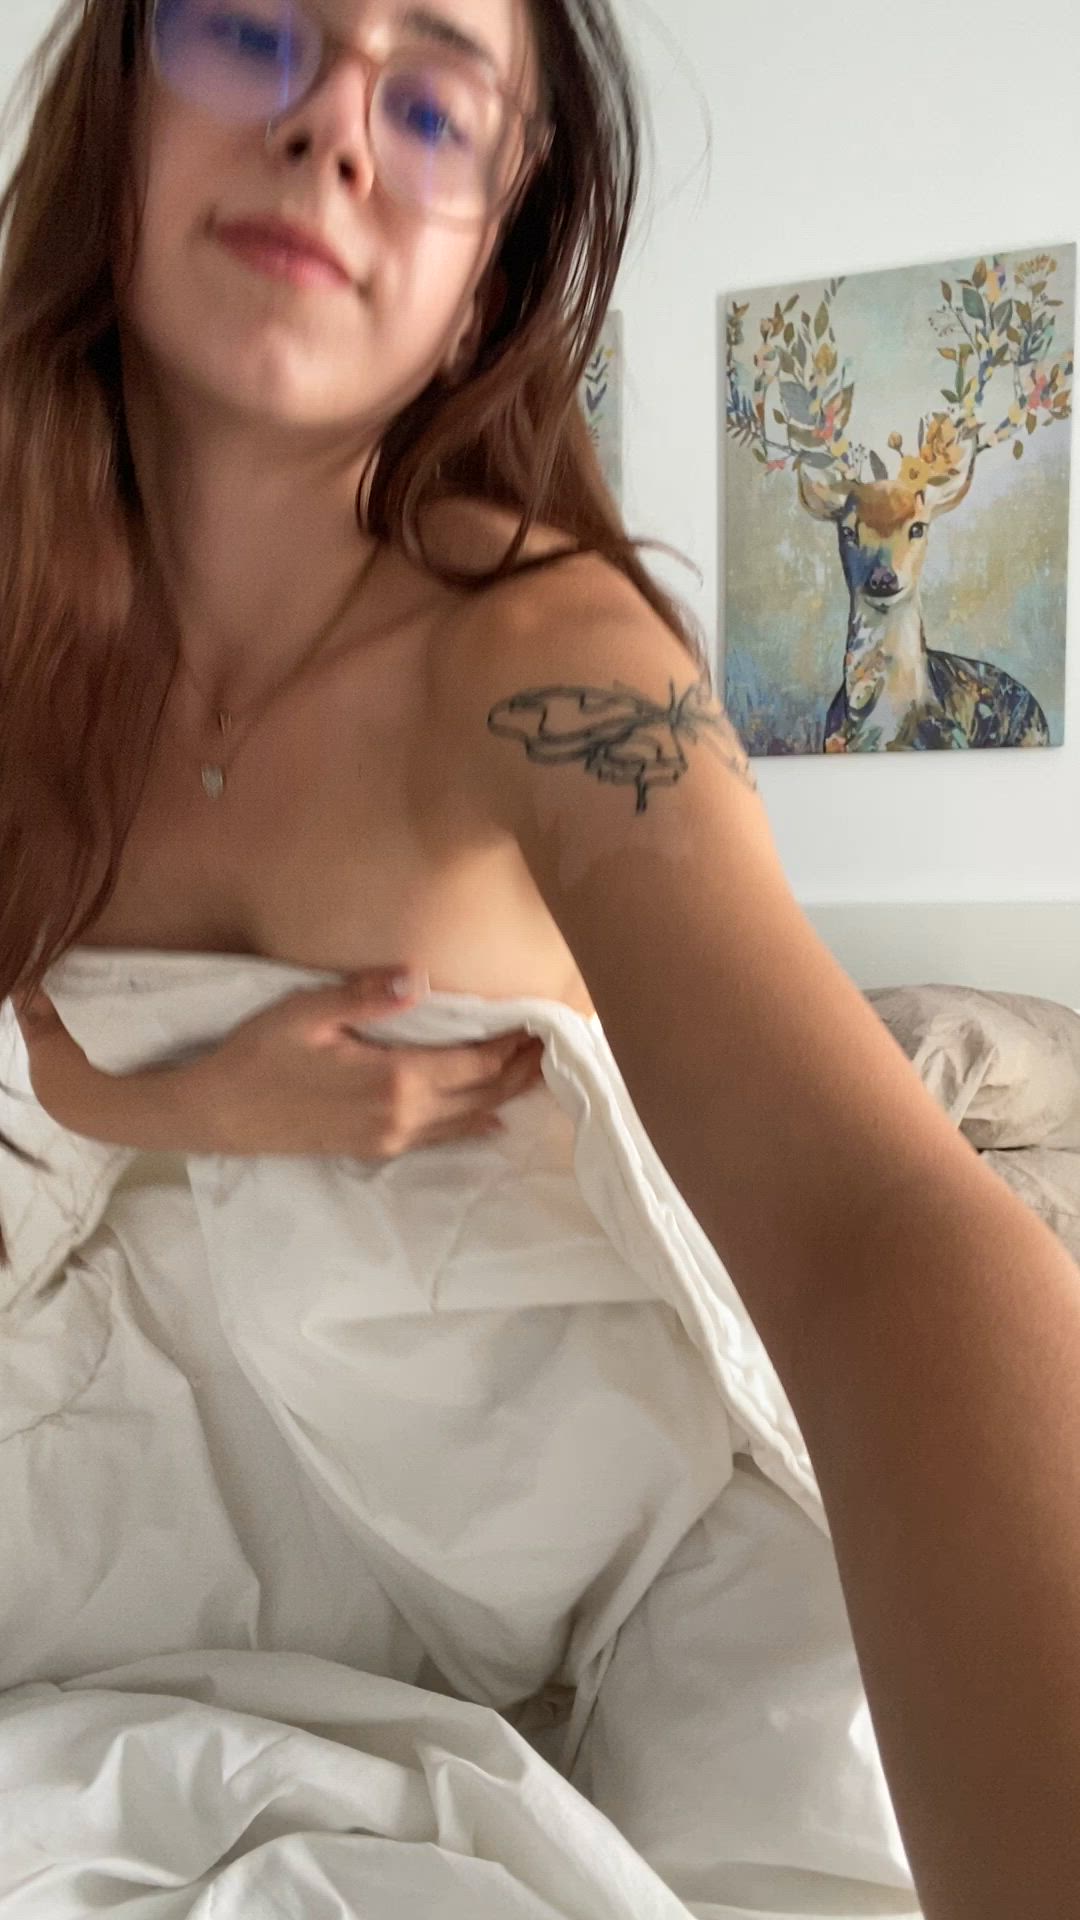 Ass porn video with onlyfans model beckybby69 <strong>@beckybby69</strong>